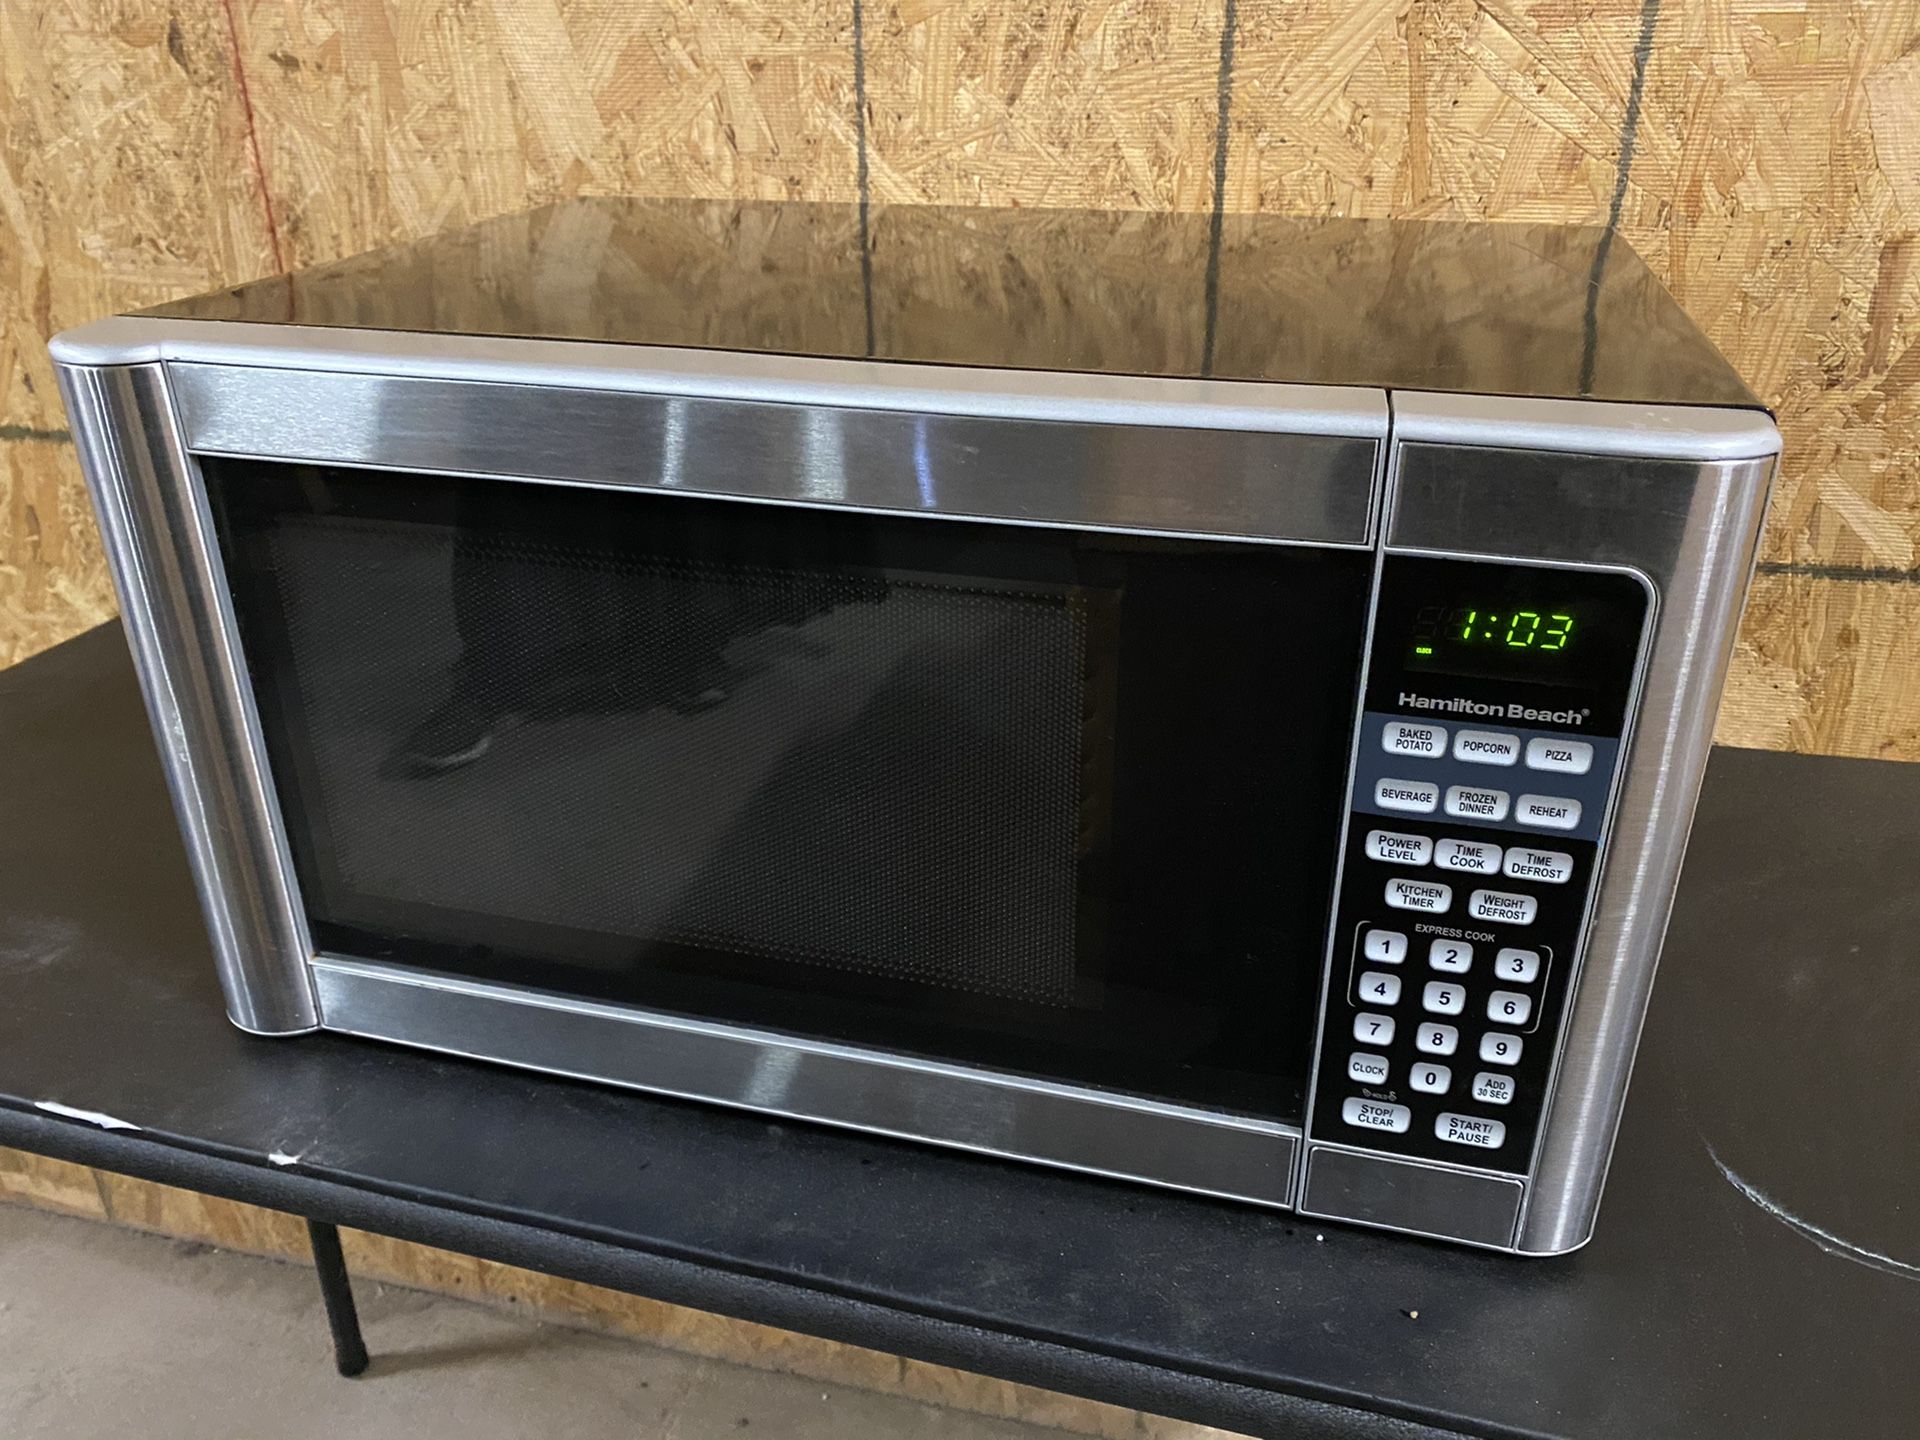 Hamilton Beach 1.1 Cu. Ft. Stainless Steel 1000 Watt Microwave Oven - Delivery Available!